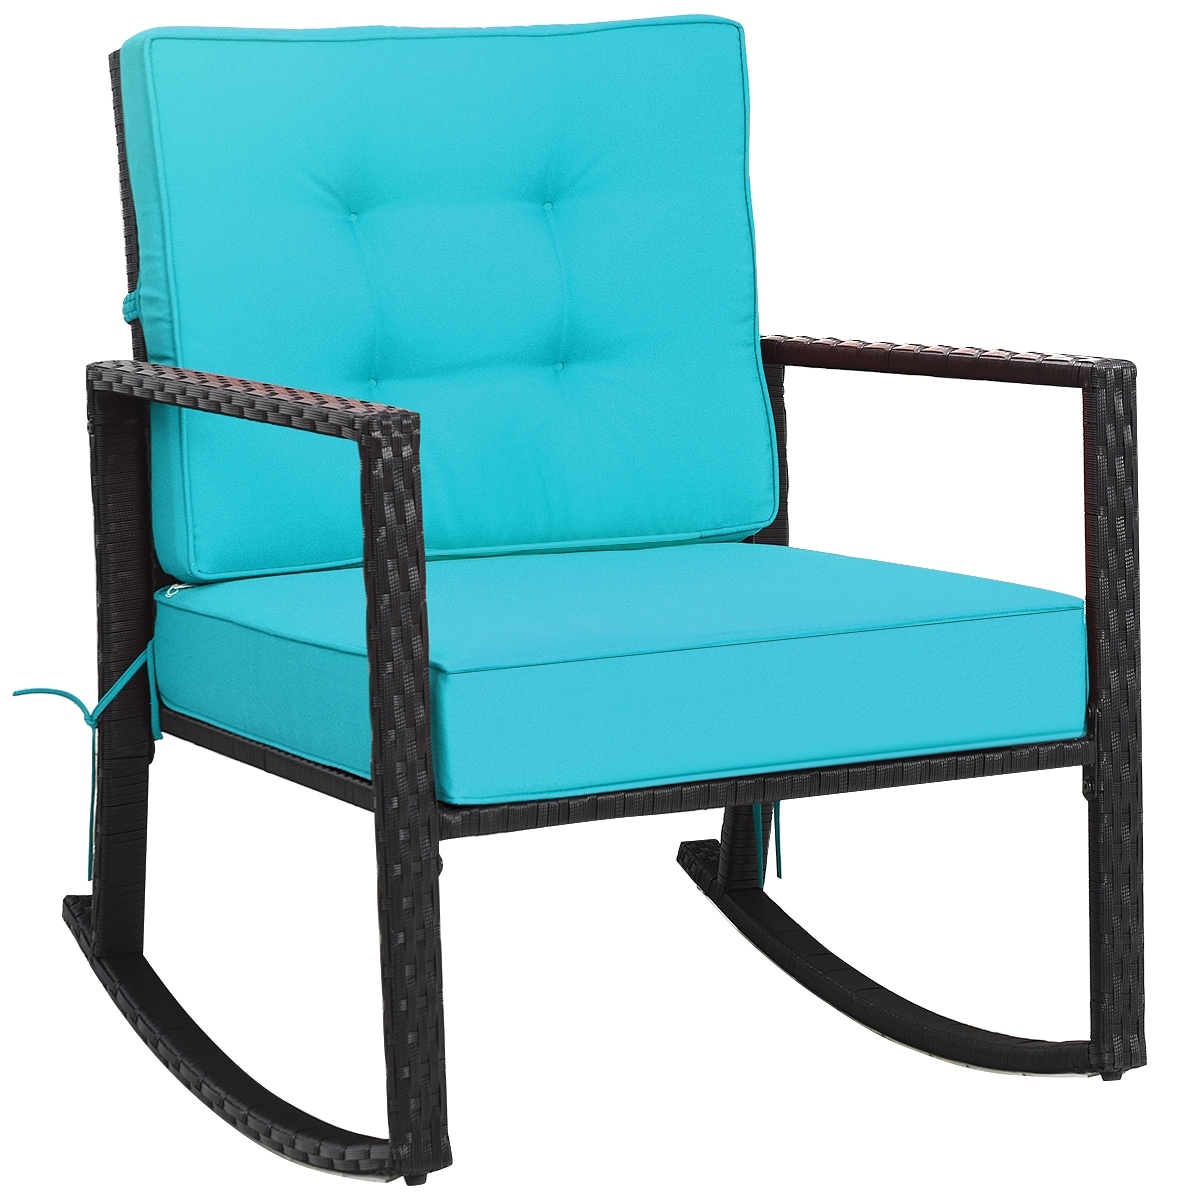 Casainc Patio Chairs Rattan Turquoise, Turquoise Metal Outdoor Chair